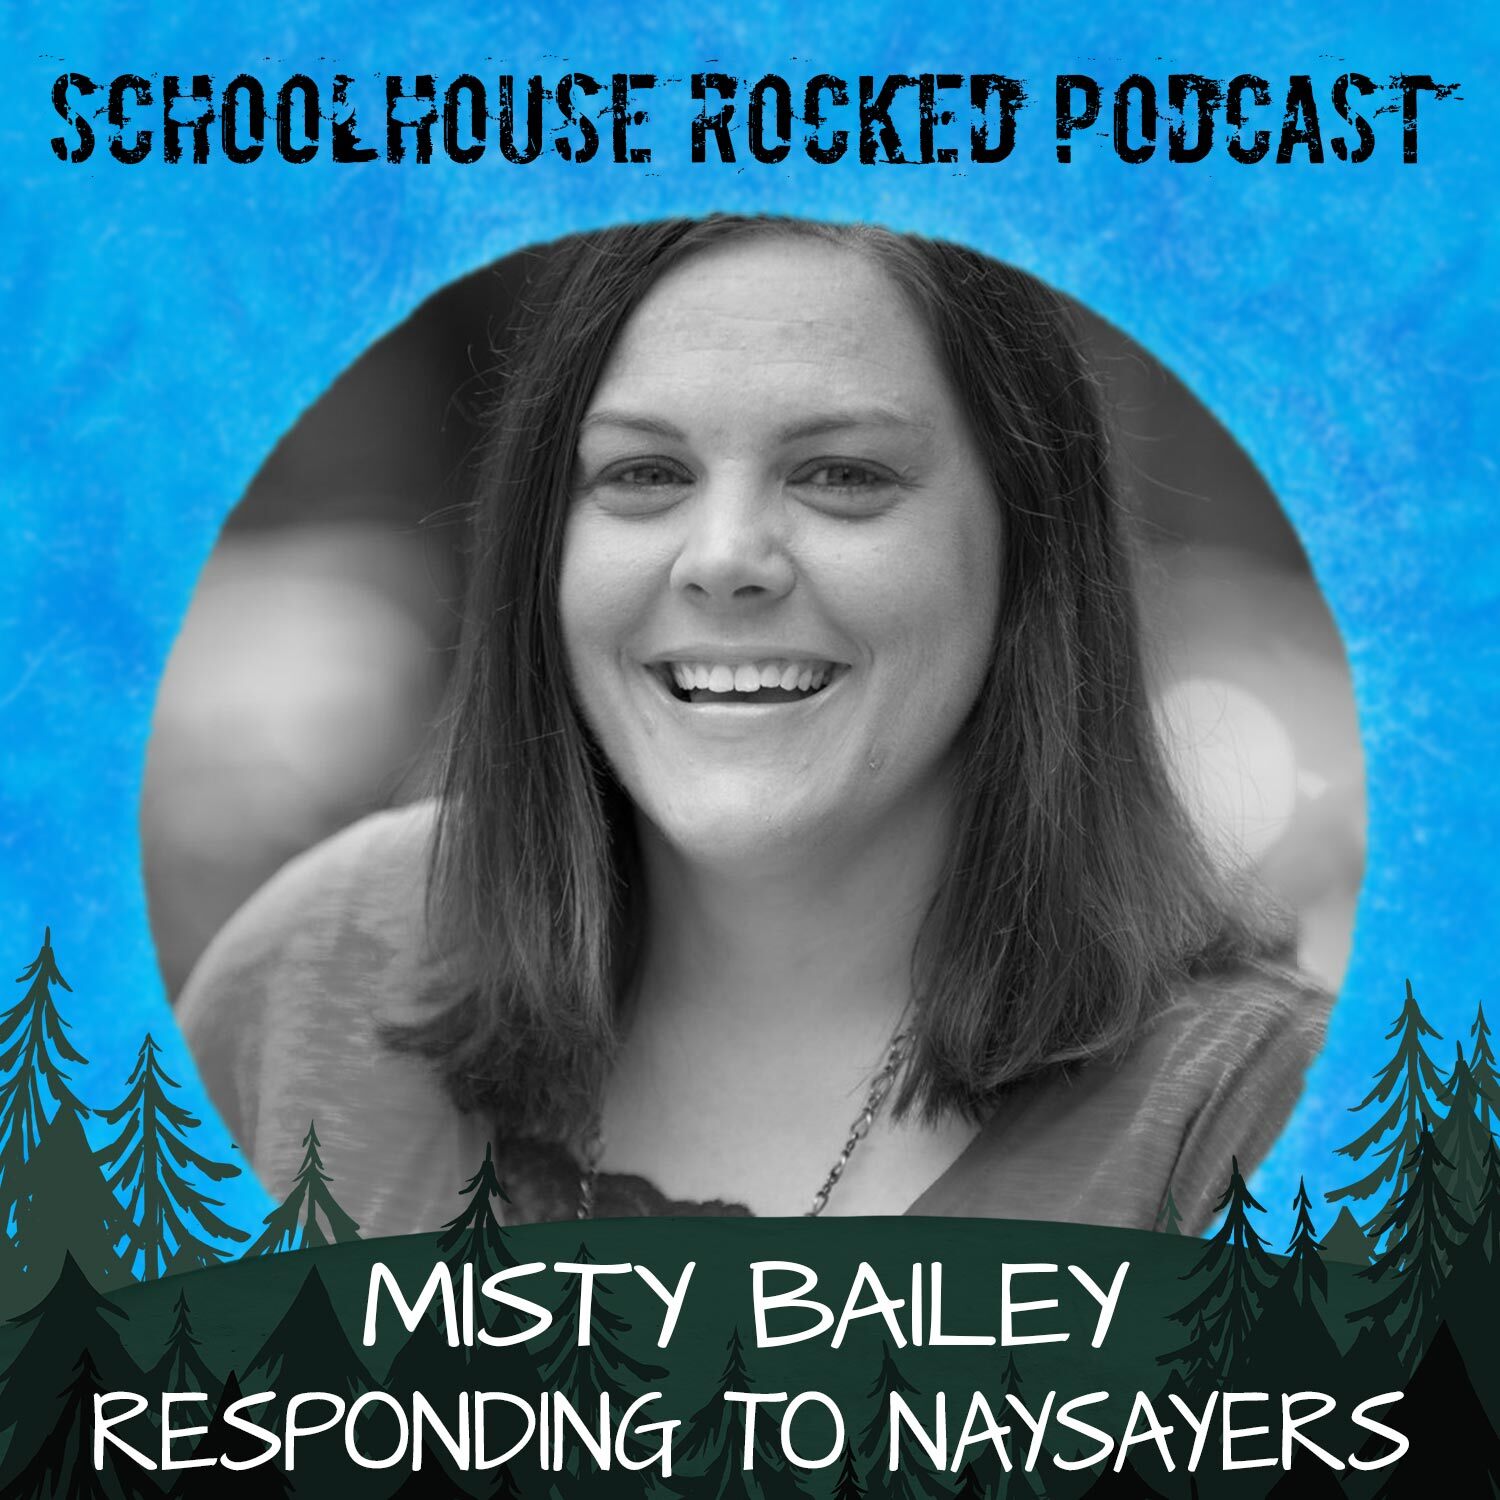 Interview with Misty Bailey - Responding to Homeschool Critics